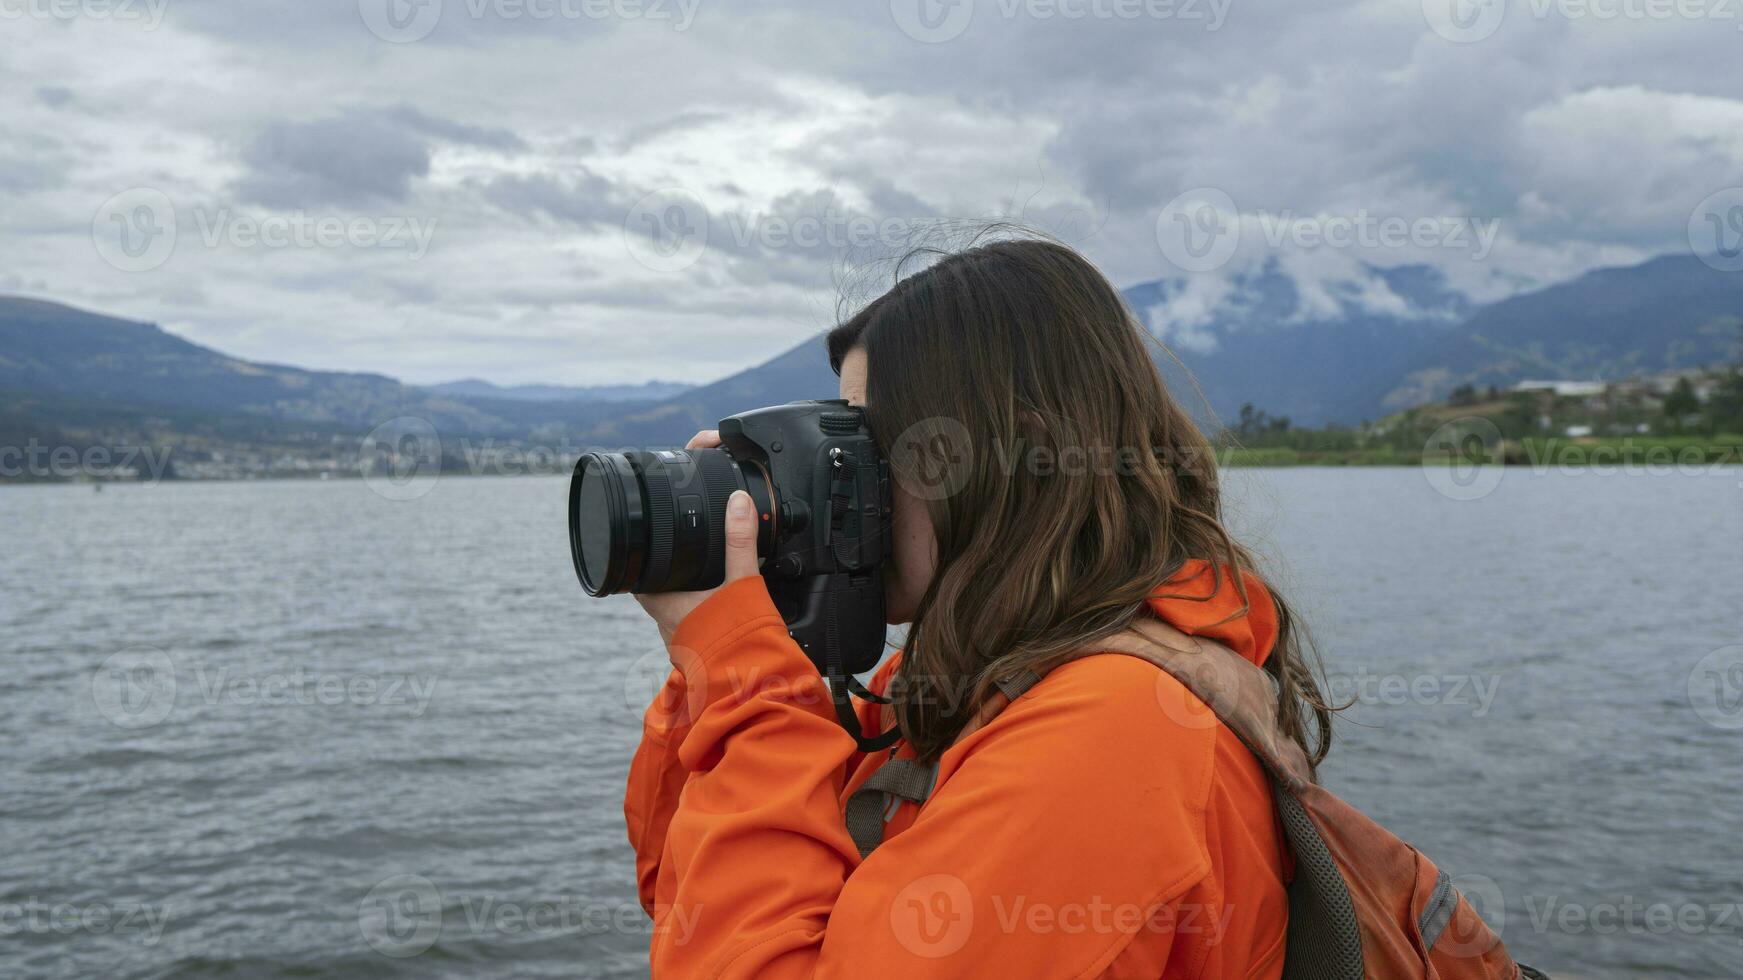 Young Latin American woman dressed in orange jacket with backpack seen from the side taking photos next to a lake surrounded by mountains